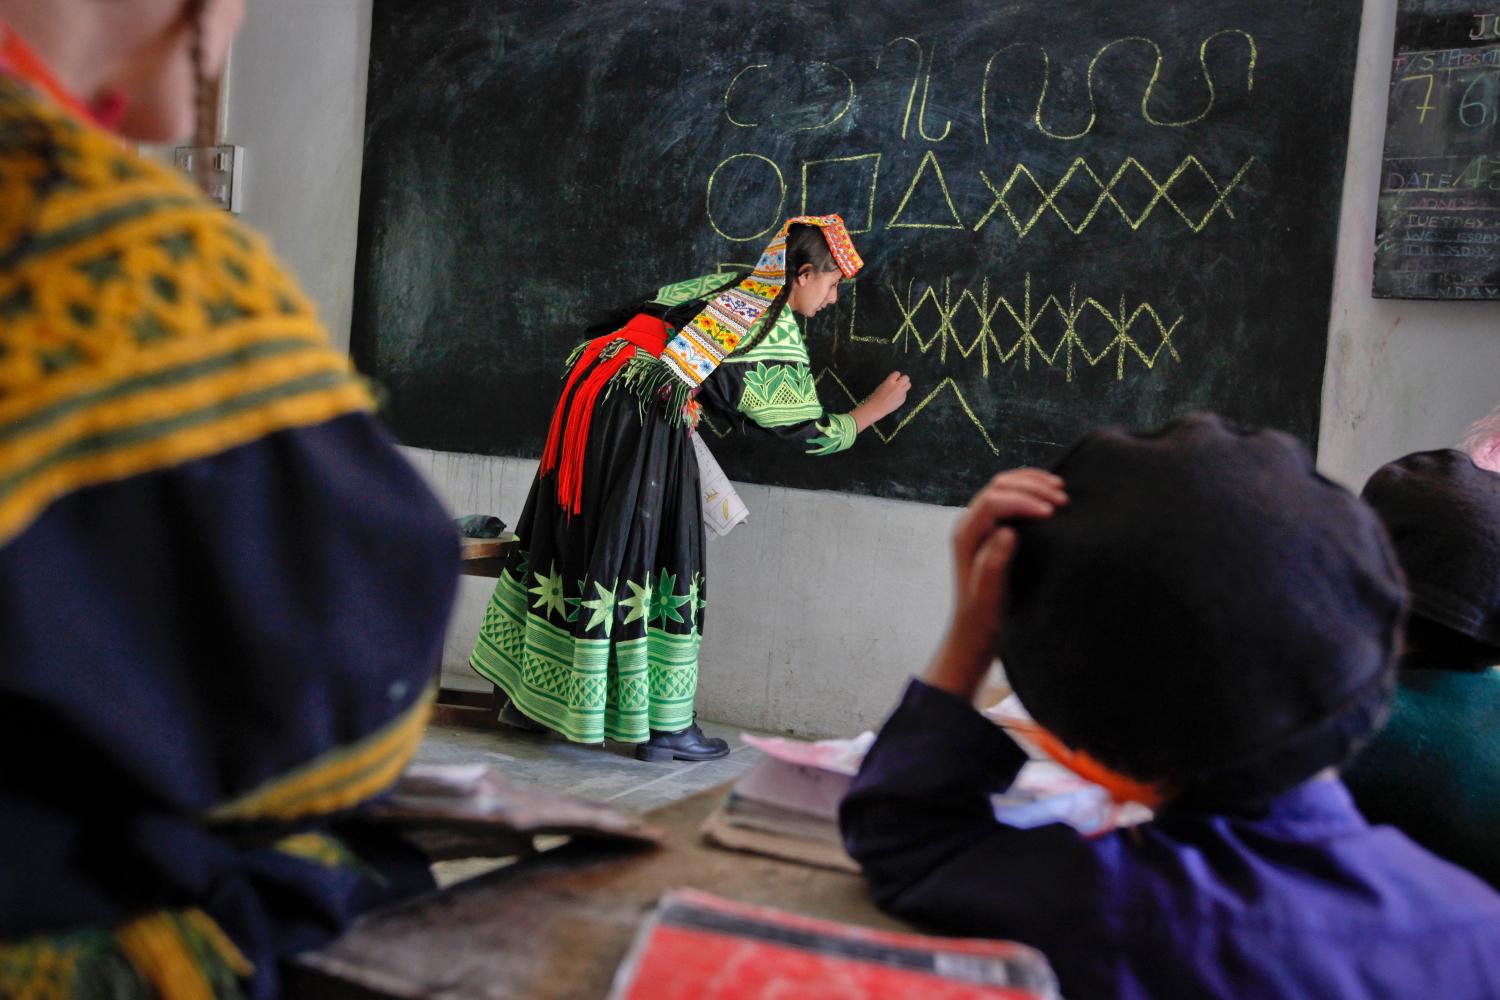 Teacher Noorzia Khan, 16, writes letters from the Kalasha alphabet on a blackboard during a lesson at the Kalasha Dur school and community centre in Brun village, located in Bumboret Kalash valley October 13, 2011. Nestled among the valleys of Pakistan's mountainous northwest, the Kalash are a tiny religious community that claim descent from Alexander the Great's army, and say they are under increasing pressure to convert to Islam. The Kalash, who number about 3,500 in Pakistan's population of 180 million, are spread over three valleys along the border with Afghanistan and are known for their distinctive dress, vibrant religious festivals, and polytheism. To match Feature PAKISTAN-KALASH/  REUTERS/Rebecca Conway   (PAKISTAN - Tags: SOCIETY EDUCATION TPX IMAGES OF THE DAY) FOR BEST QUALITY IMAGE: ALSO SEE GM1E9720MFD01 - GM1E7AK1E7B01